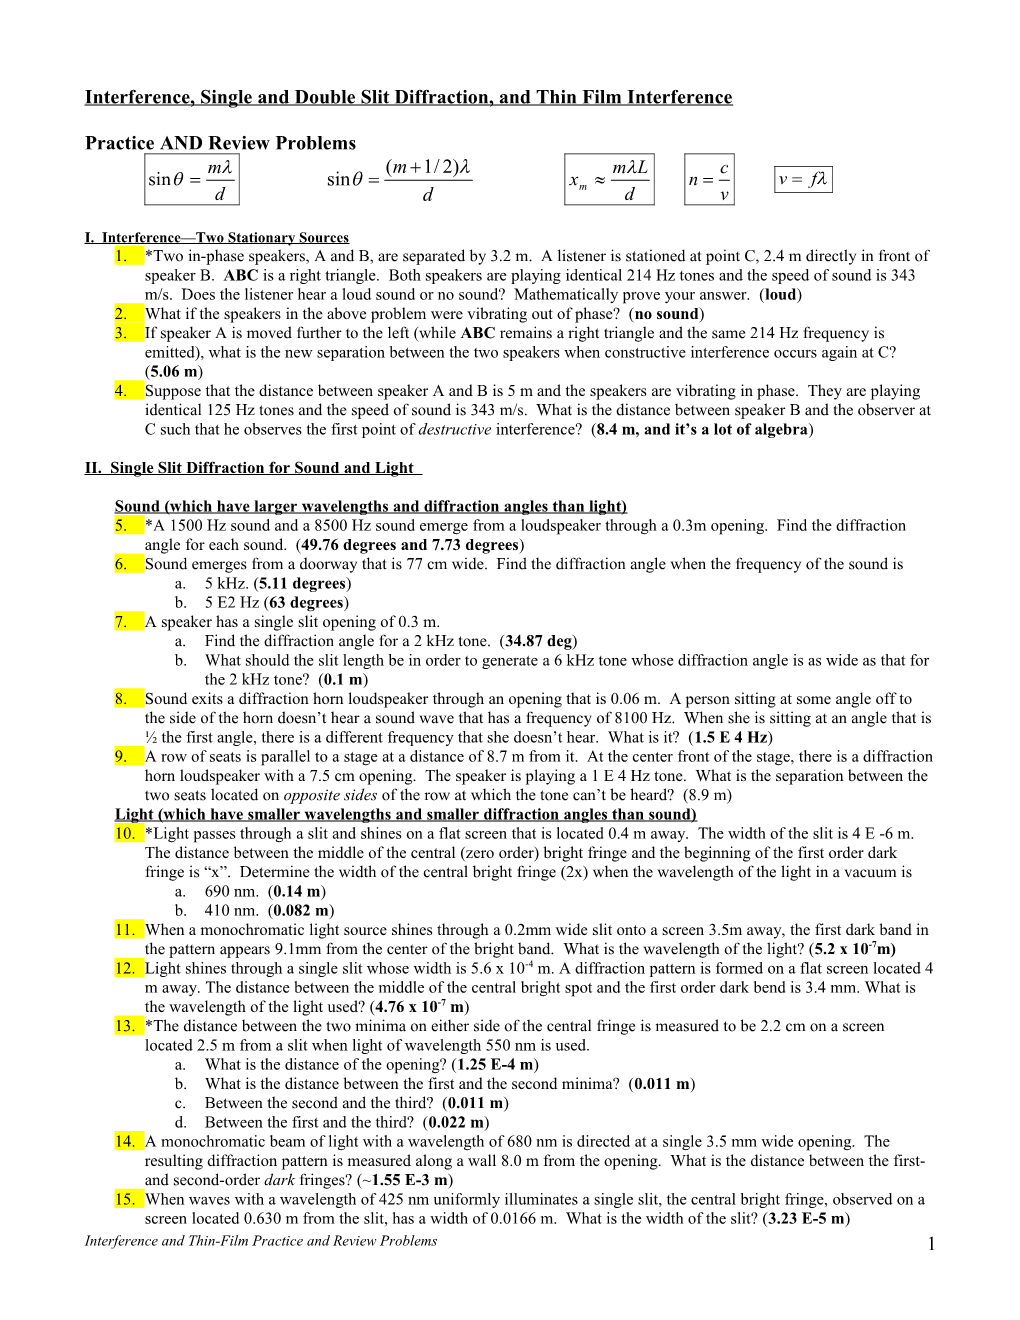 Unit 13 Diffraction and Thin Film Interference AP Practice and Review Problems